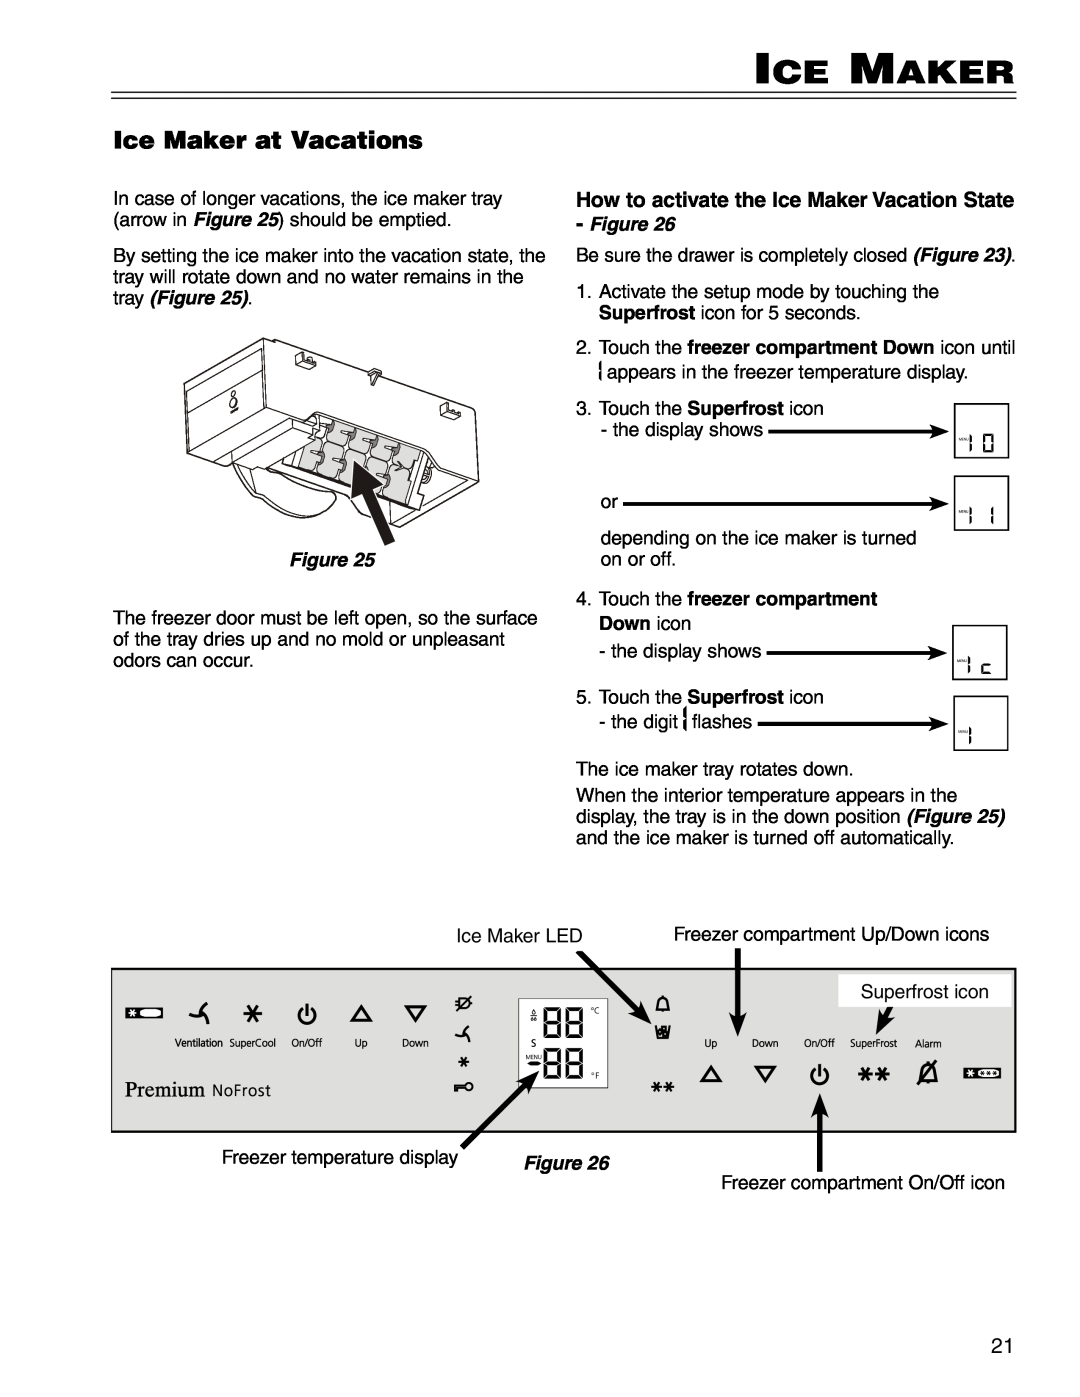 Liebherr CS 1660 manual Ice Maker at Vacations, How to activate the Ice Maker Vacation State 